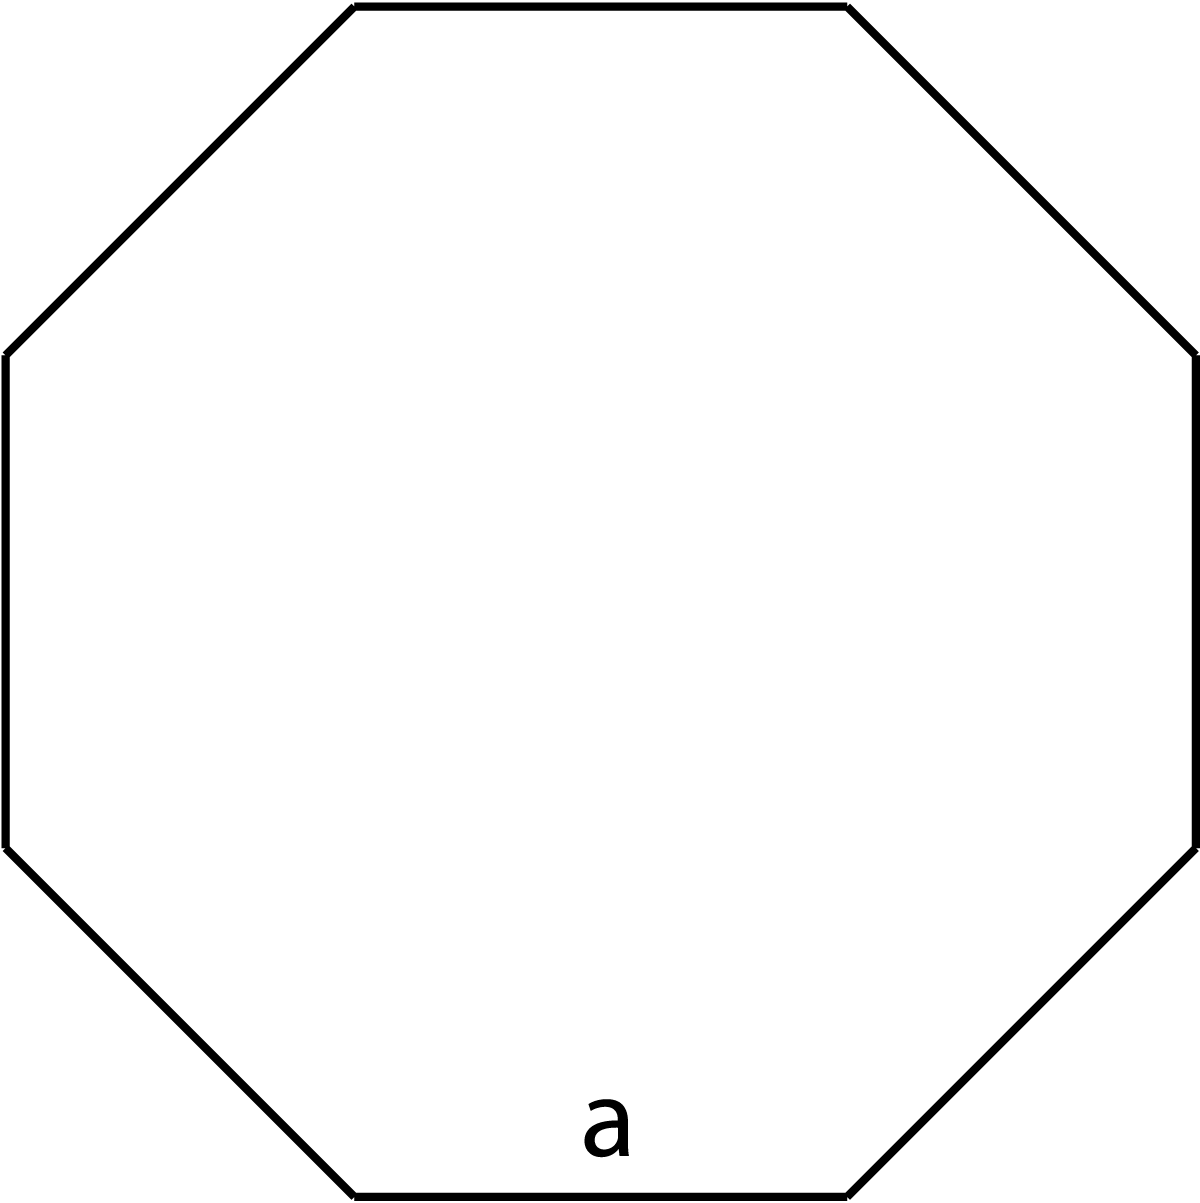 Diagram of an octagon showing a = edge length